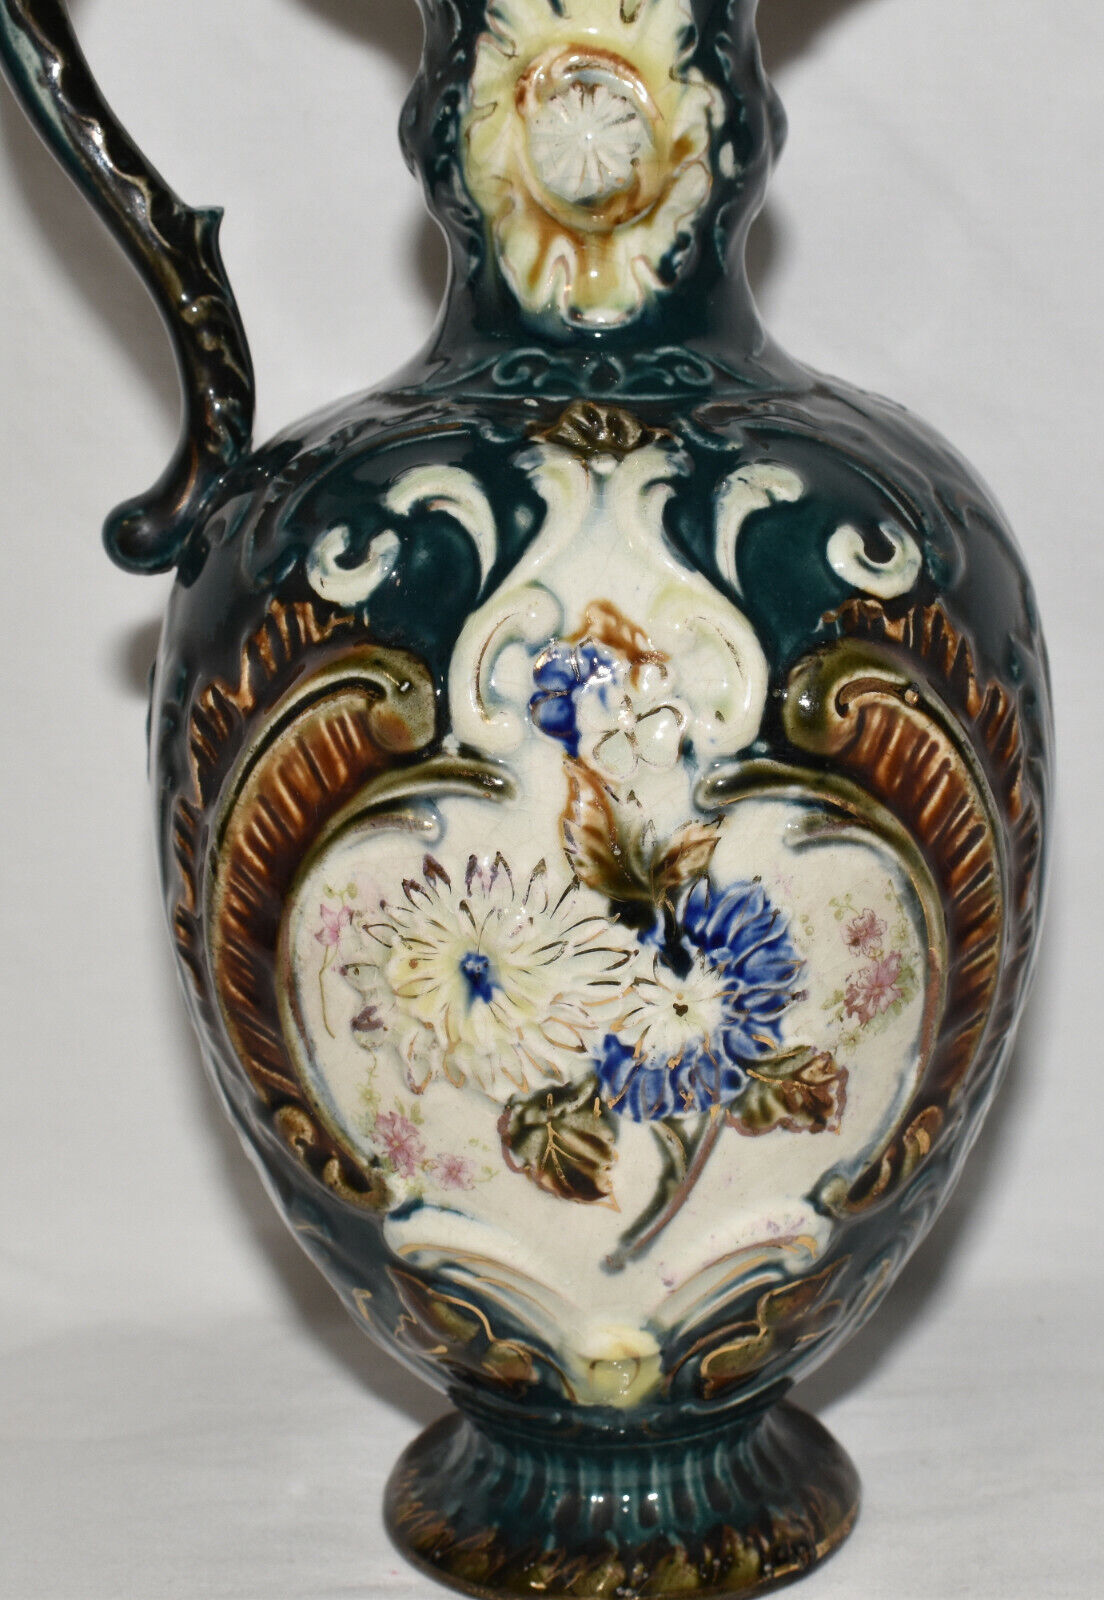 Antique Hand Painted Porcelain Ewer Pitcher 11" Ewer Floral Motif in High Relief